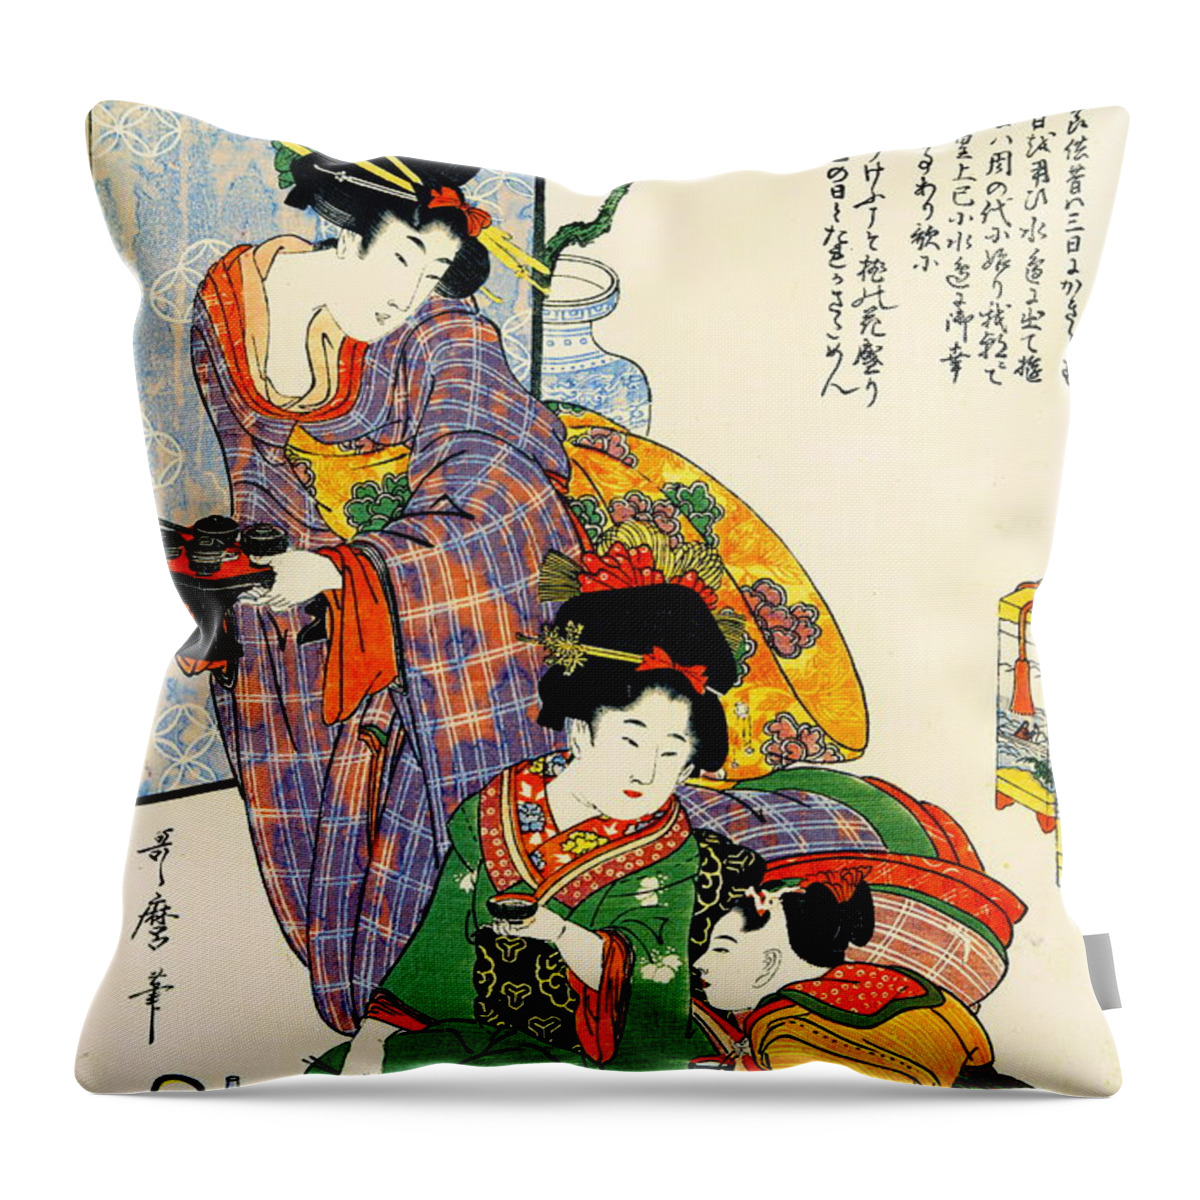 Girl's Festival 1801 Throw Pillow featuring the photograph Girl's Festival 1801 by Padre Art